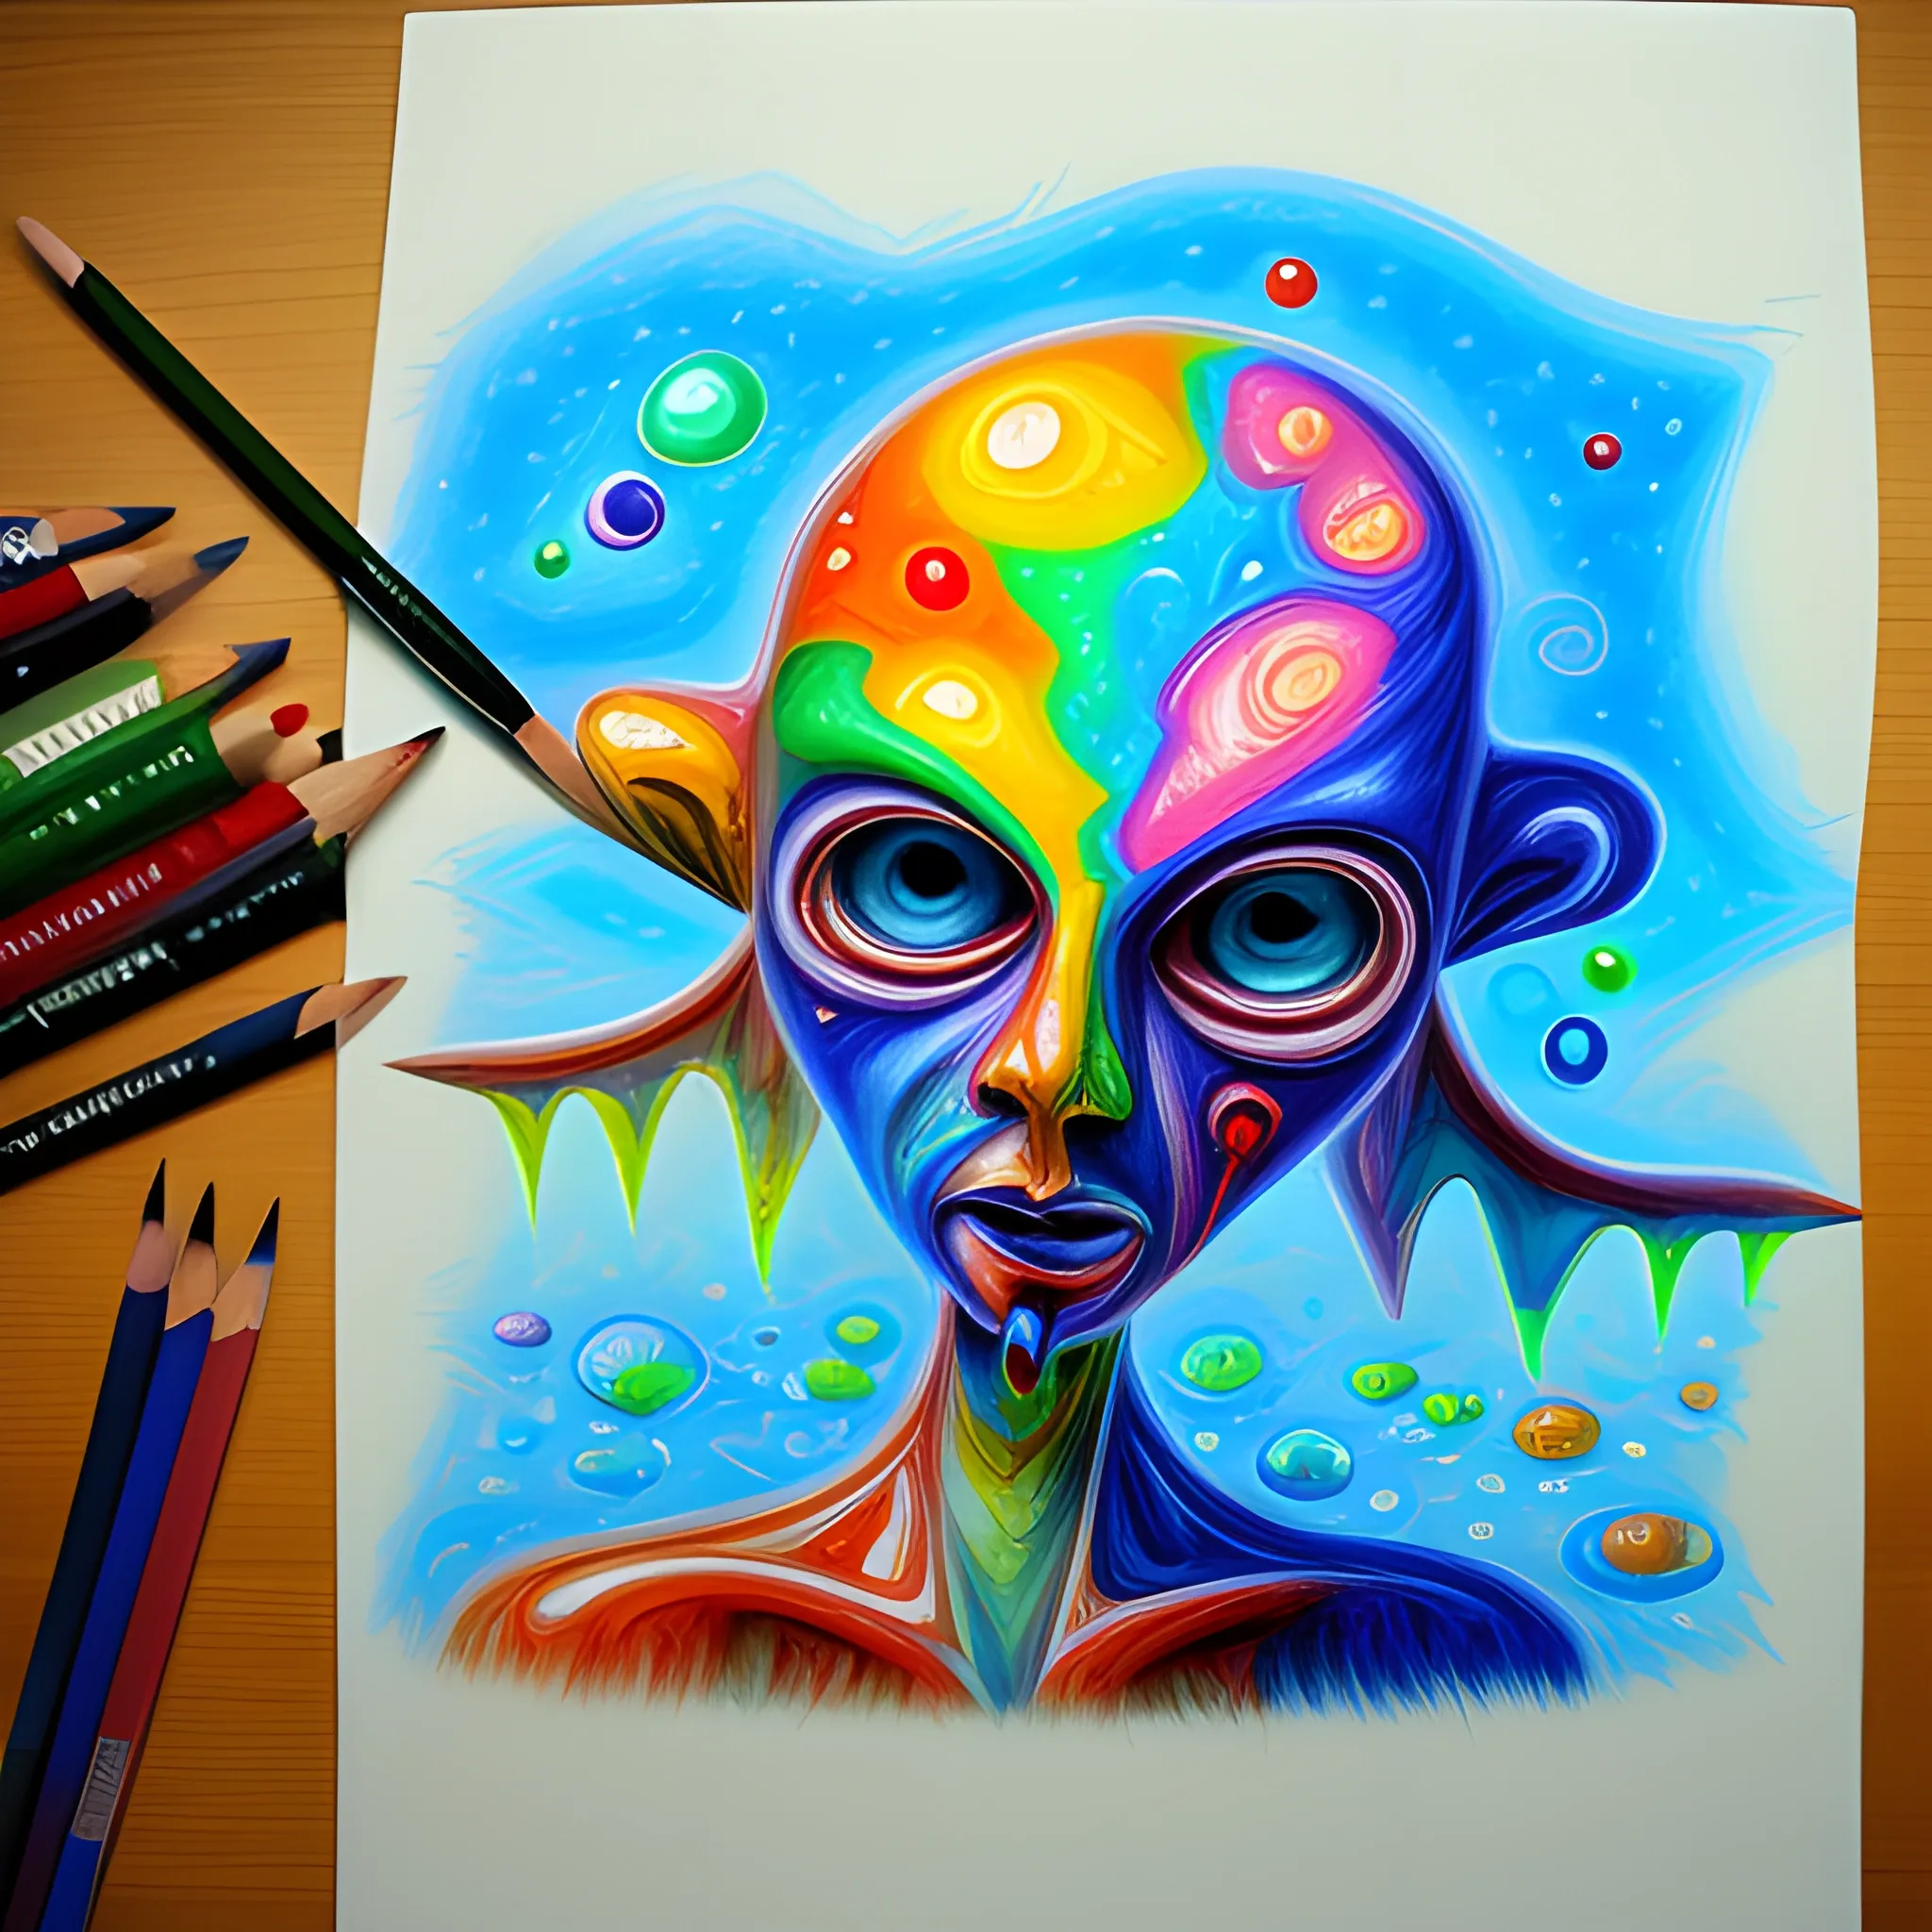 , 3D, Trippy, Cartoon, Oil Painting, Water Color, Pencil Sketch